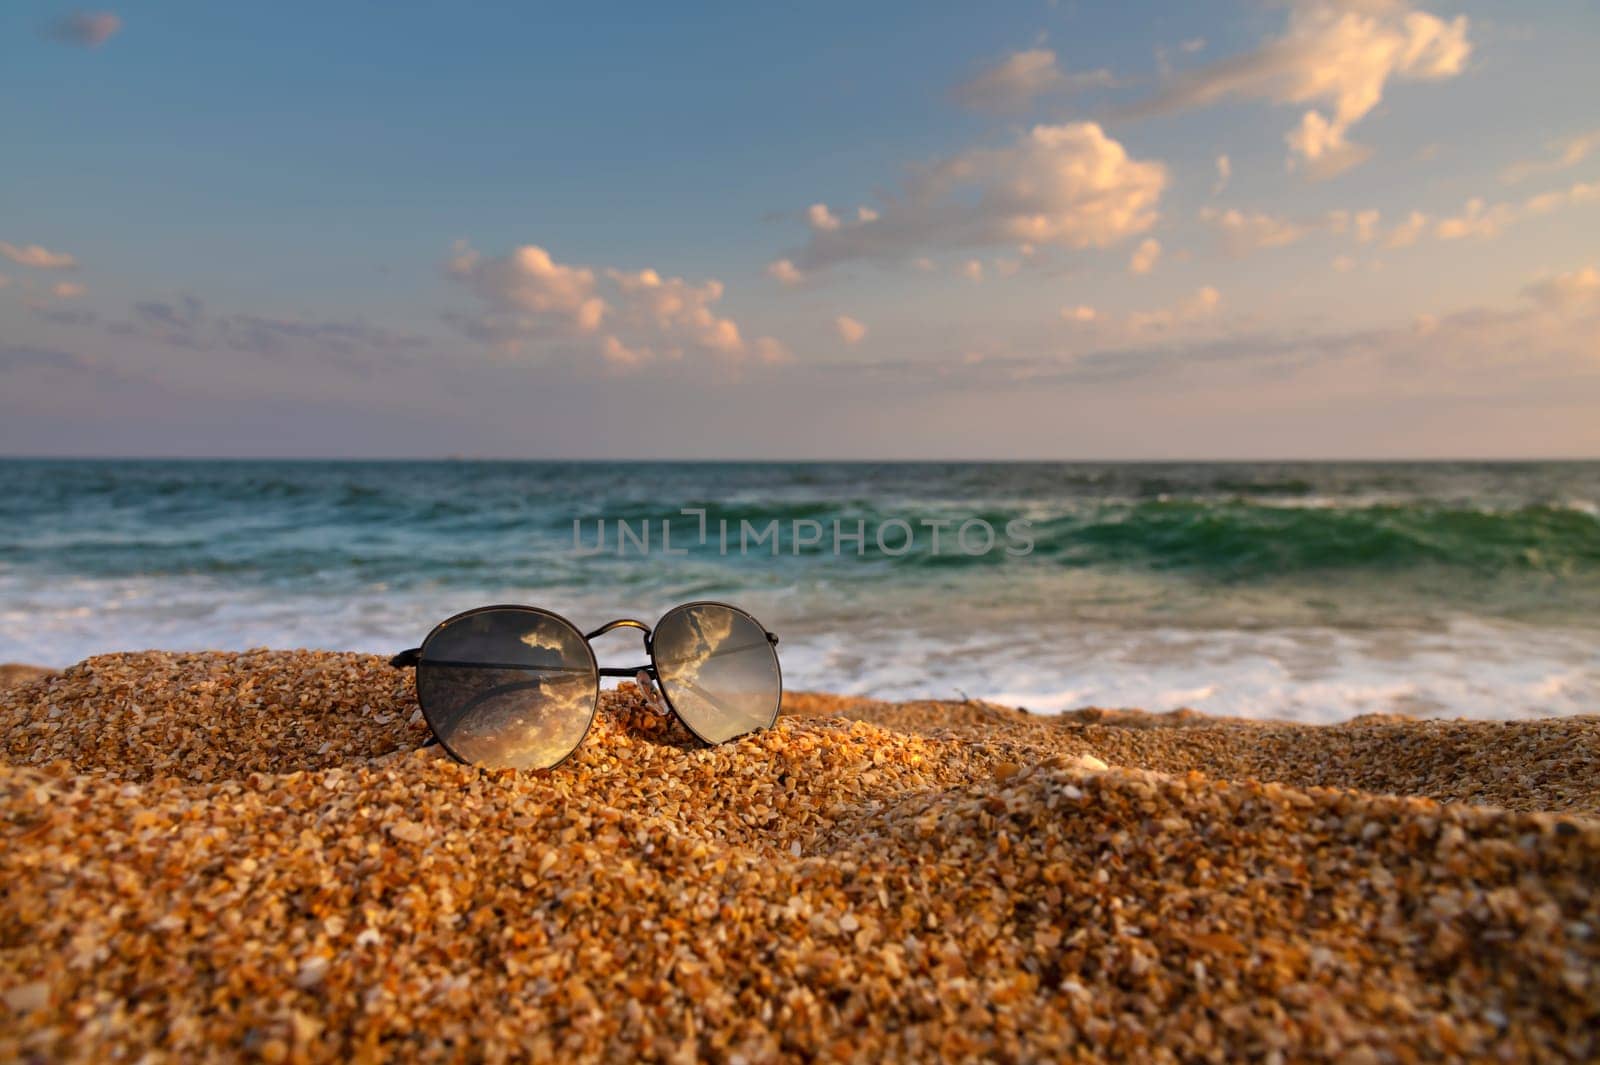 Sand dune and sunglasses. Sunglasses on clean sand with small bumps against the backdrop of the turquoise sea and sunset sky, close-up, side view by yanik88